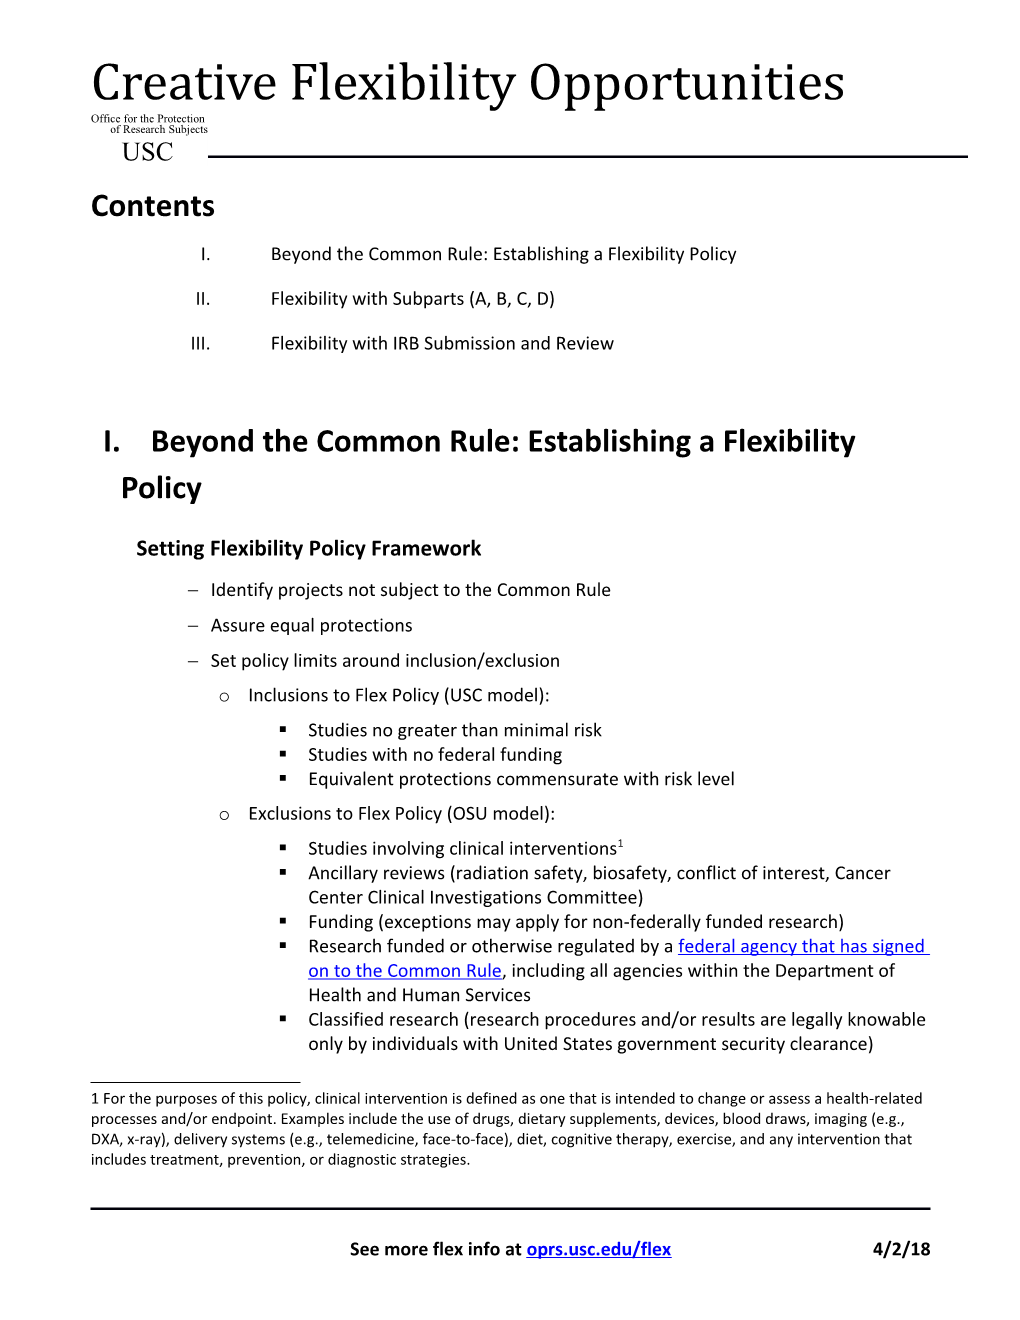 I.Beyond the Common Rule: Establishing a Flexibility Policy